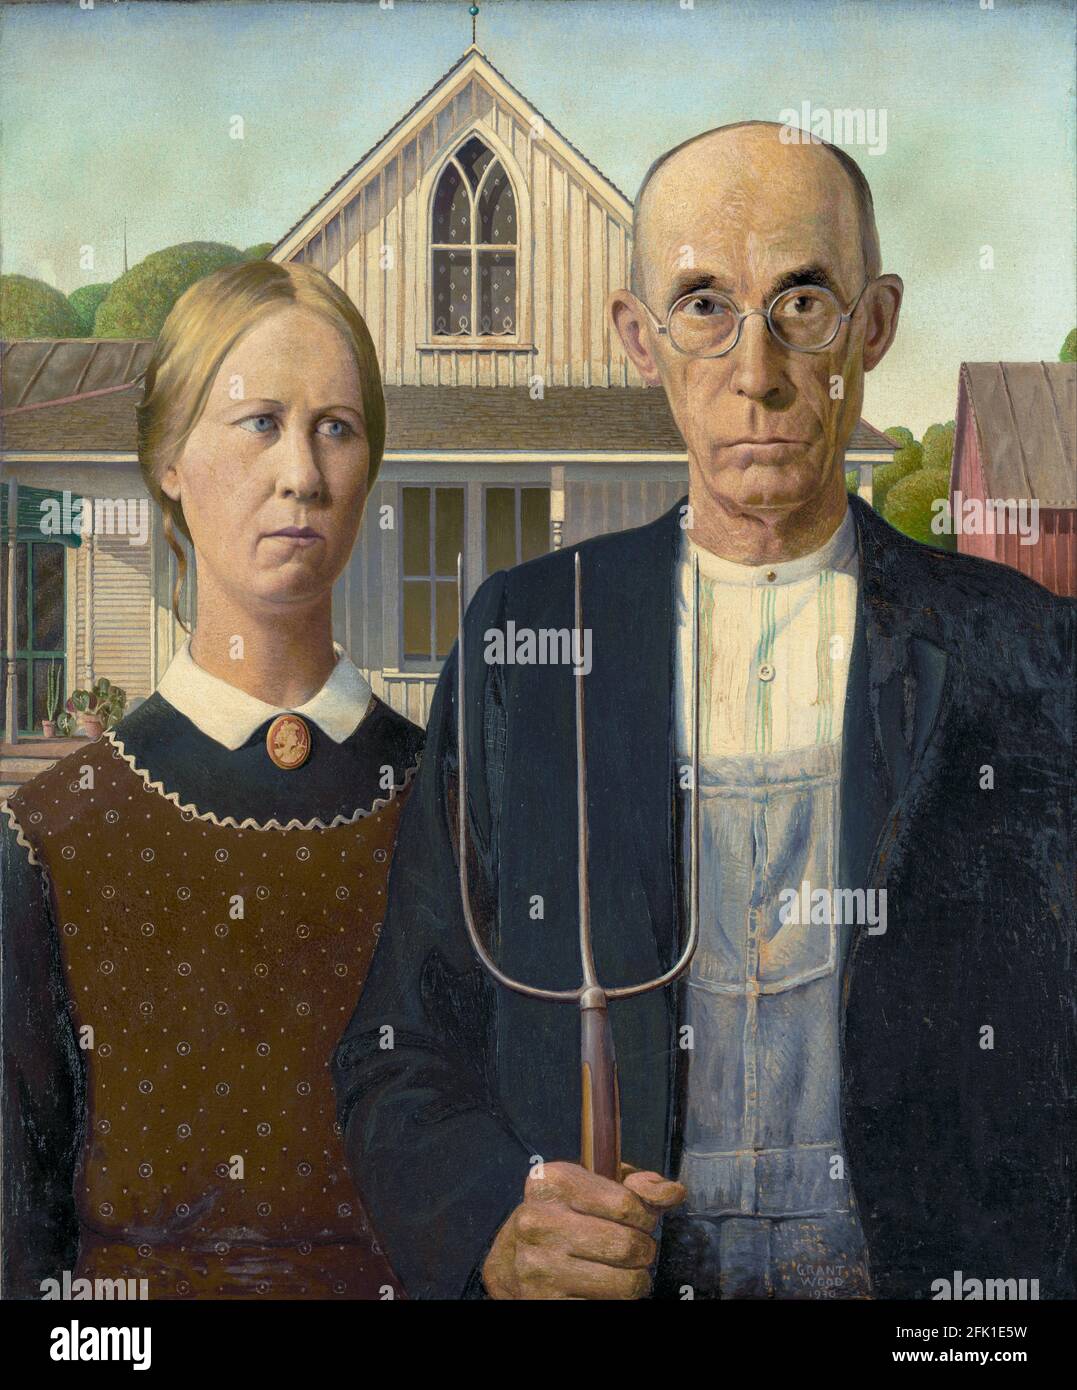 Grant Wood, American Gothic, 1930, oil on panel, Art Institute of Chicago Stock Photo